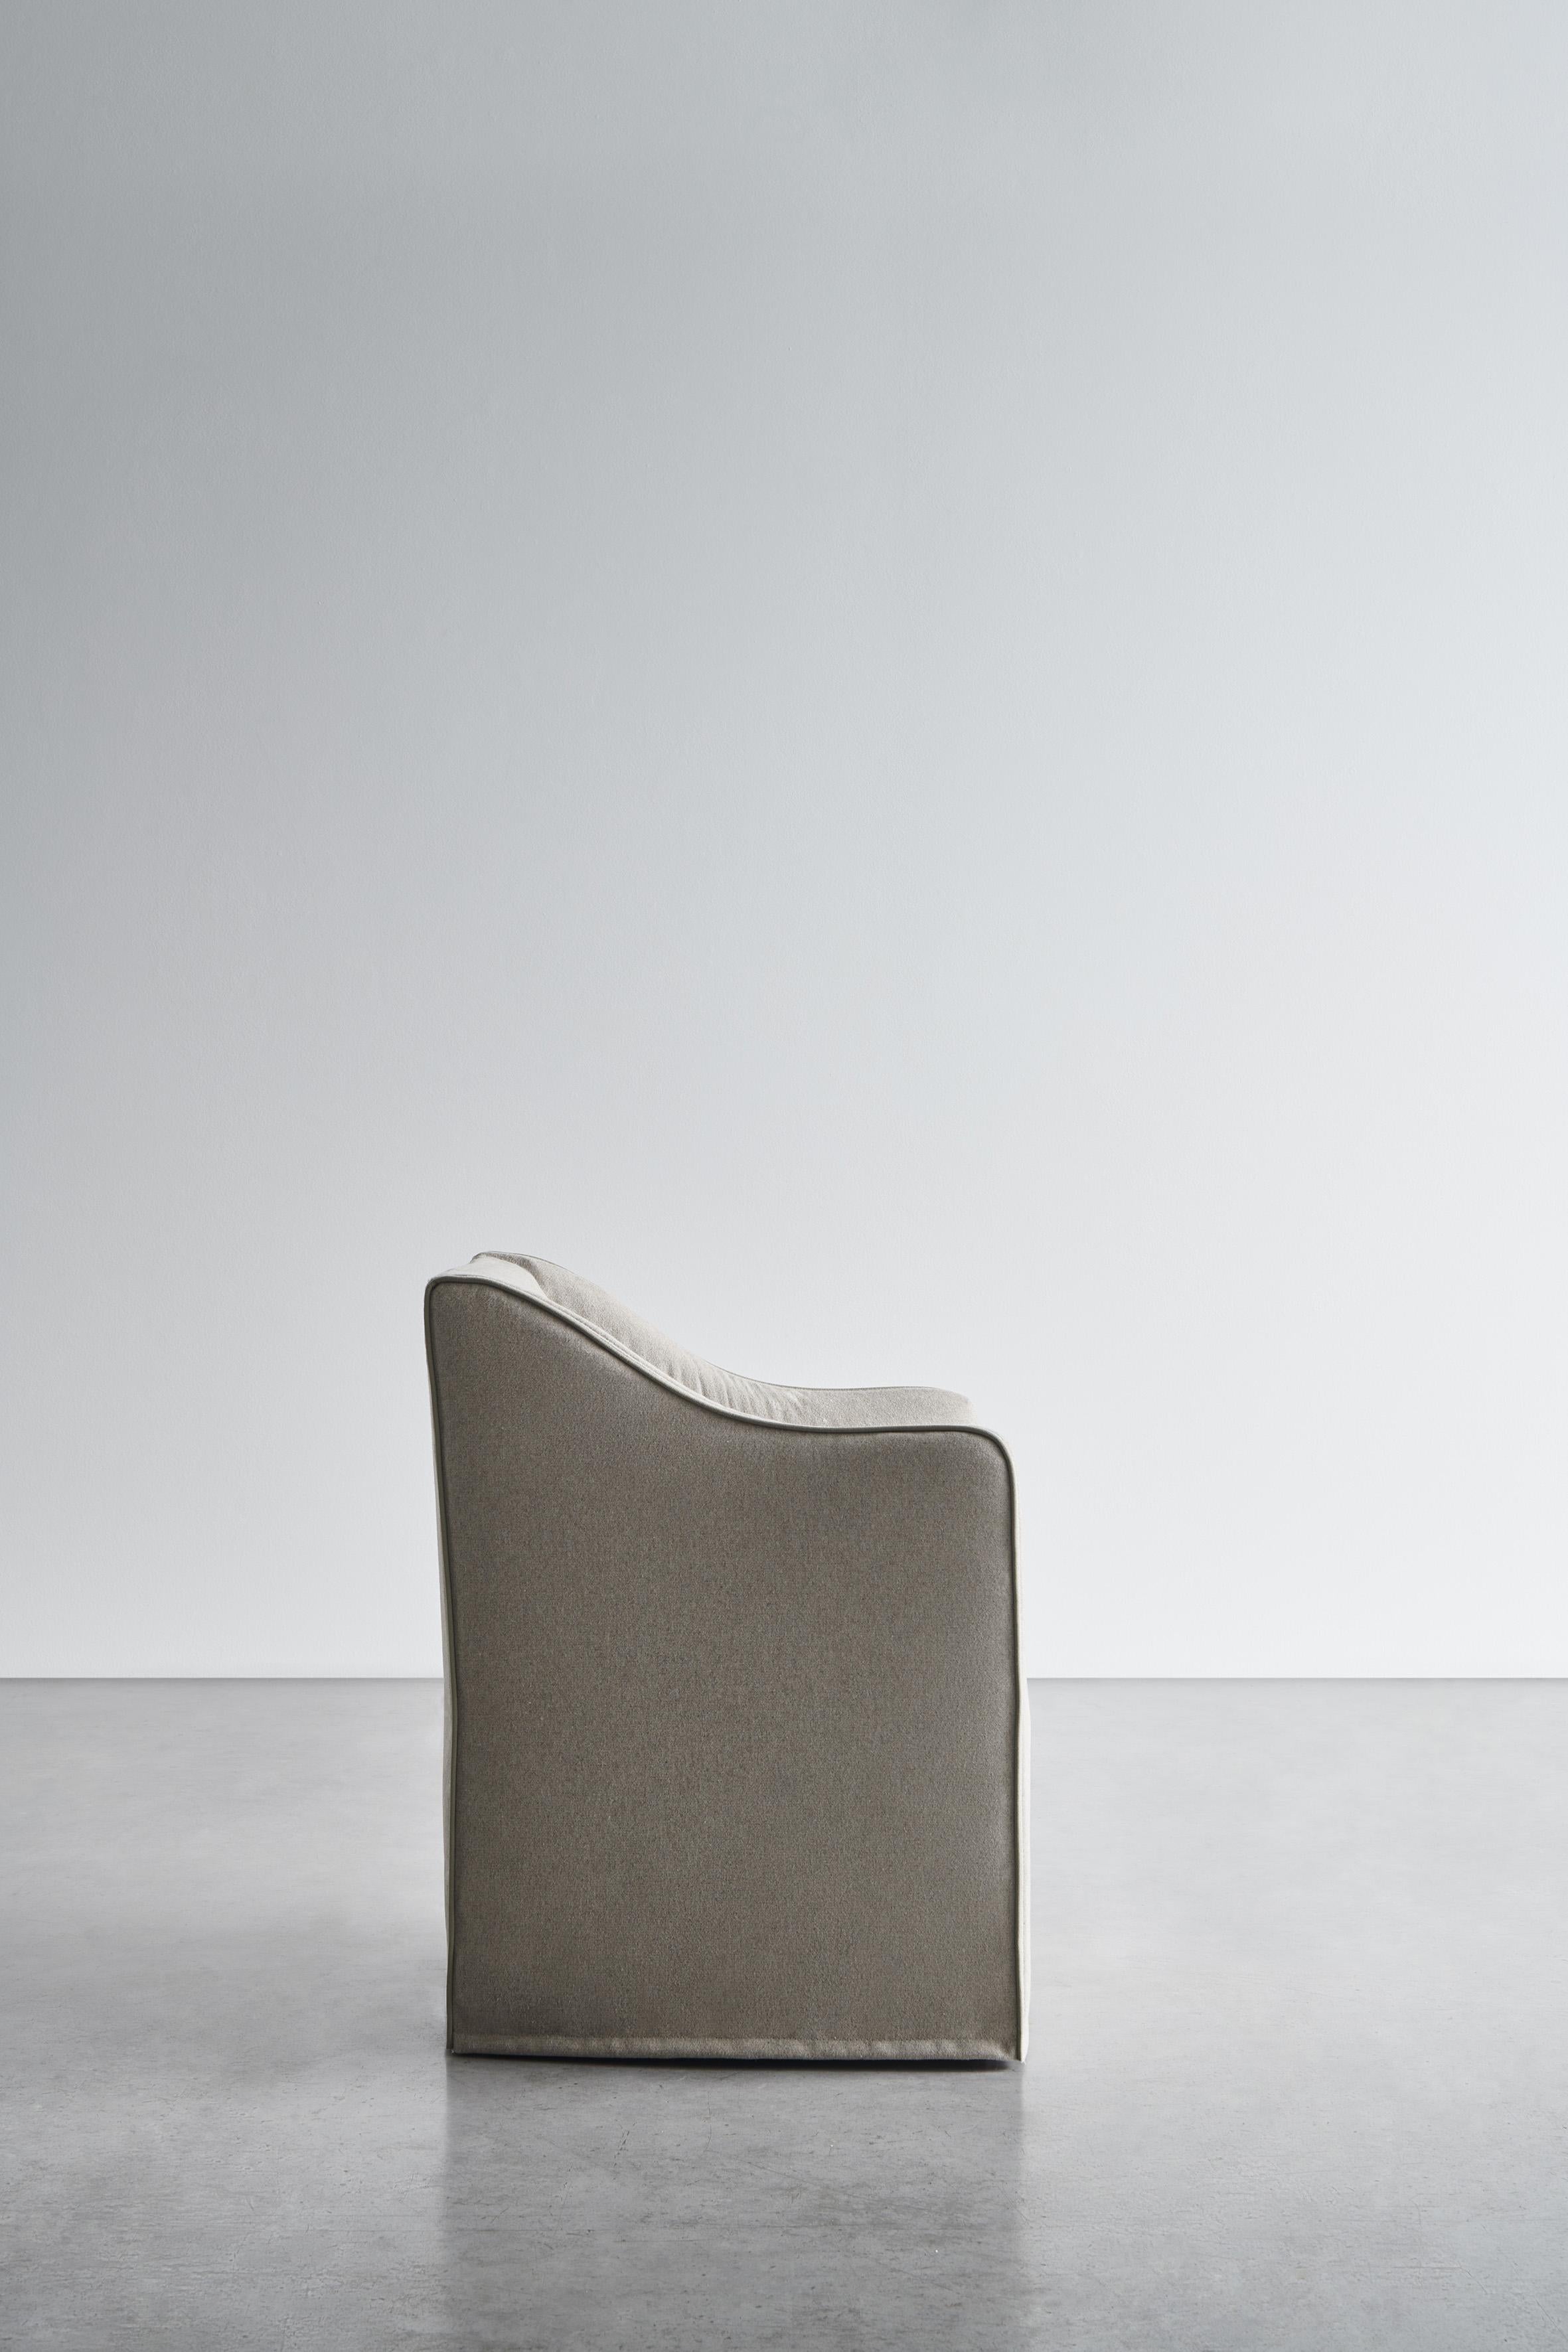 Gervasoni Armchair Saia 09 by David Lopez Quincoces In New Condition For Sale In Brooklyn, NY